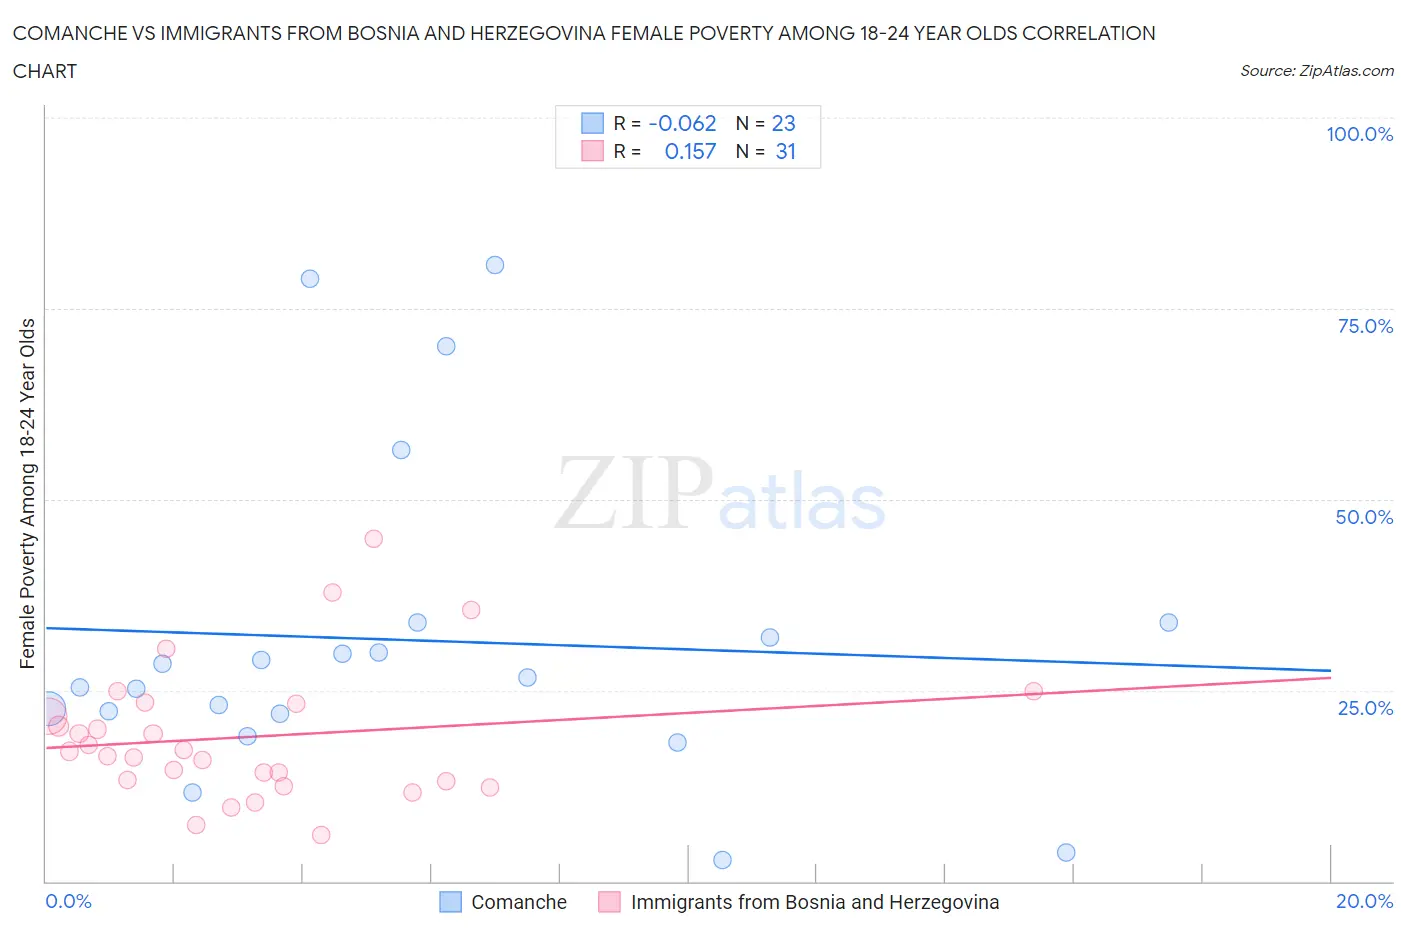 Comanche vs Immigrants from Bosnia and Herzegovina Female Poverty Among 18-24 Year Olds